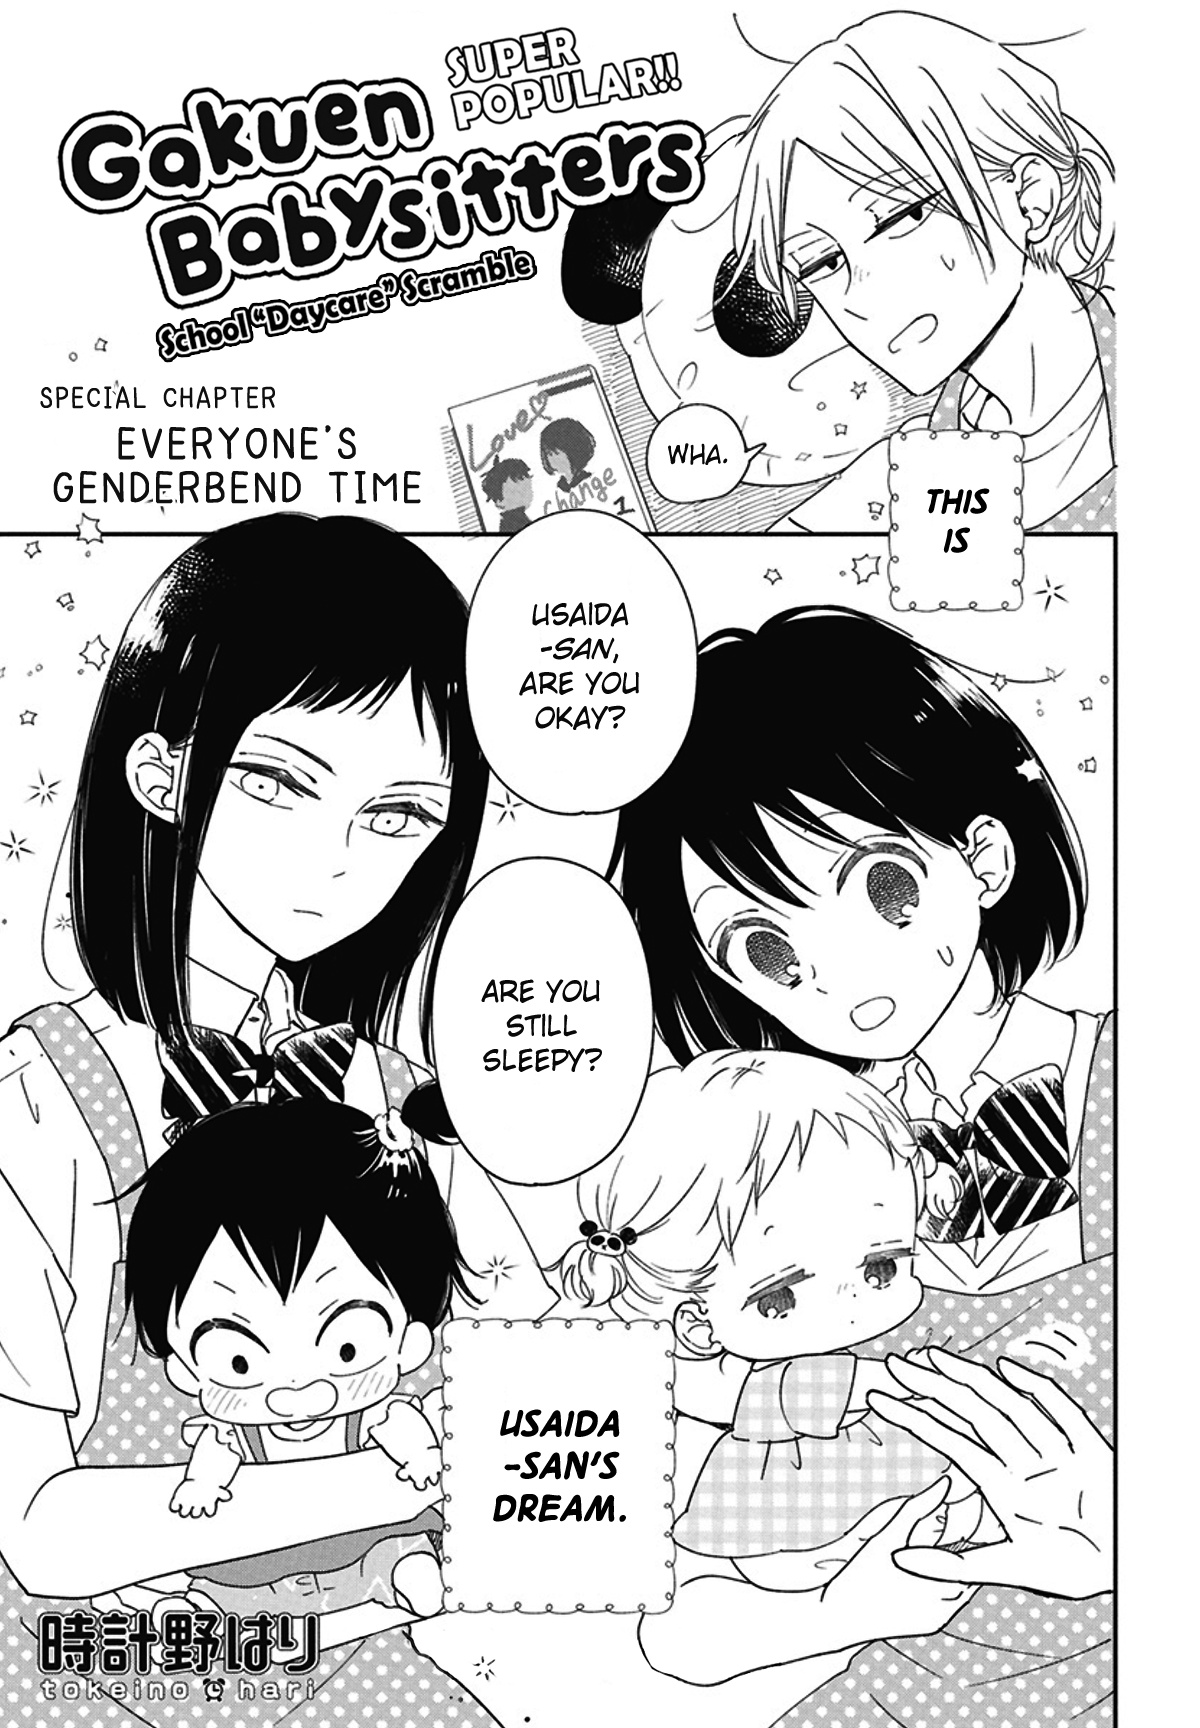 Gakuen Babysitters Chapter 127.5: Everyone's Genderbend Time - Picture 1